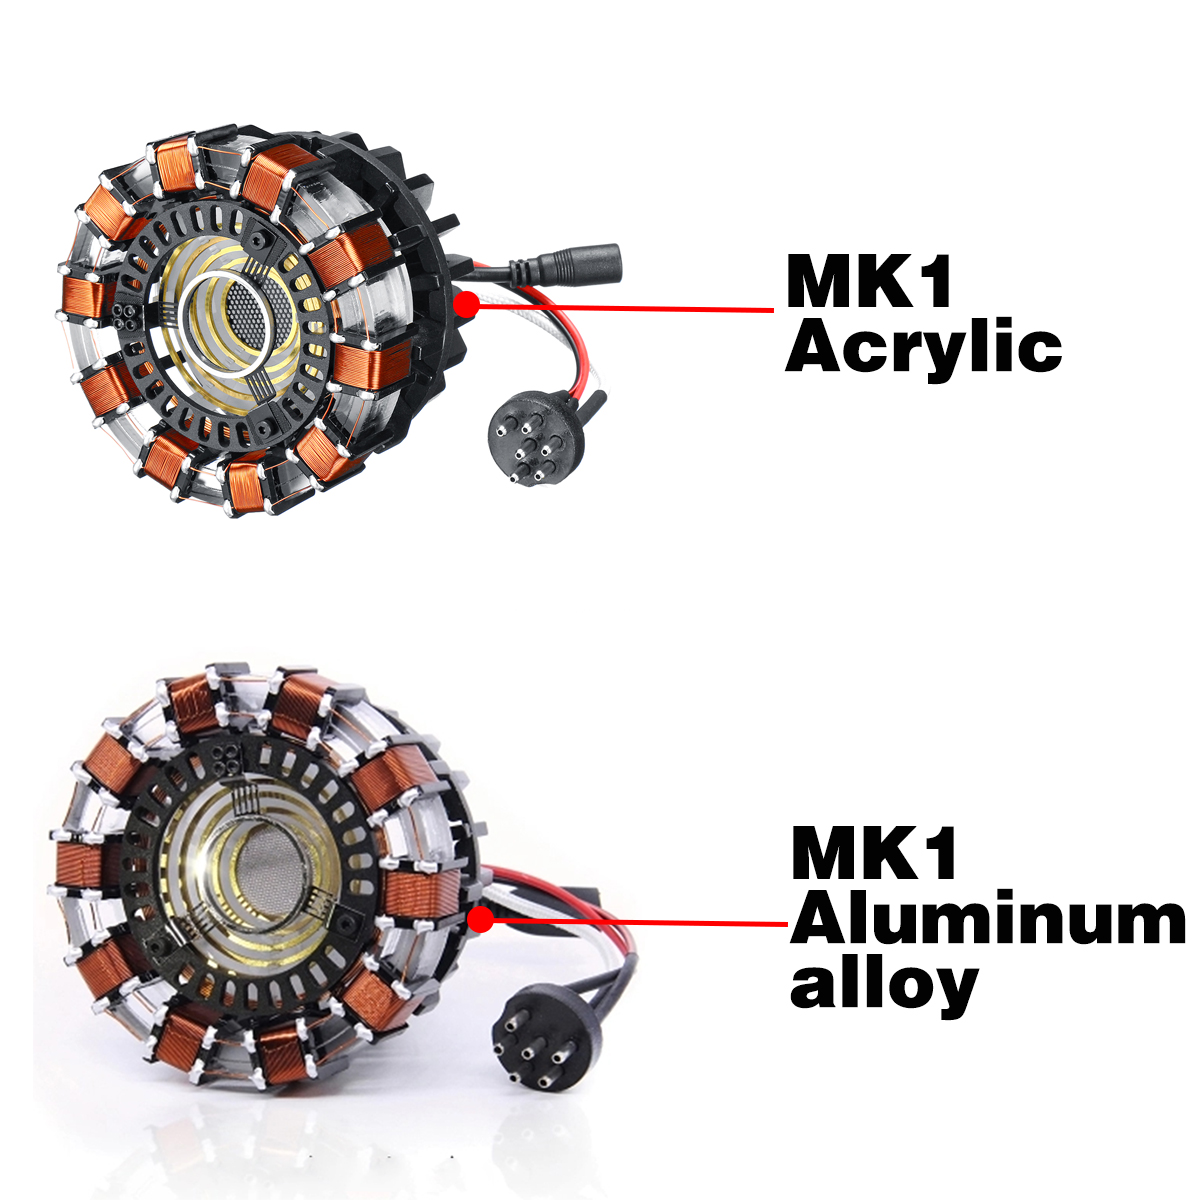 MK1 Aluminum Alloy Tony 1:1 Arc Reactor DIY Model Kit LED Chest Lamp USB Movie Props Gifts Science Toy 58